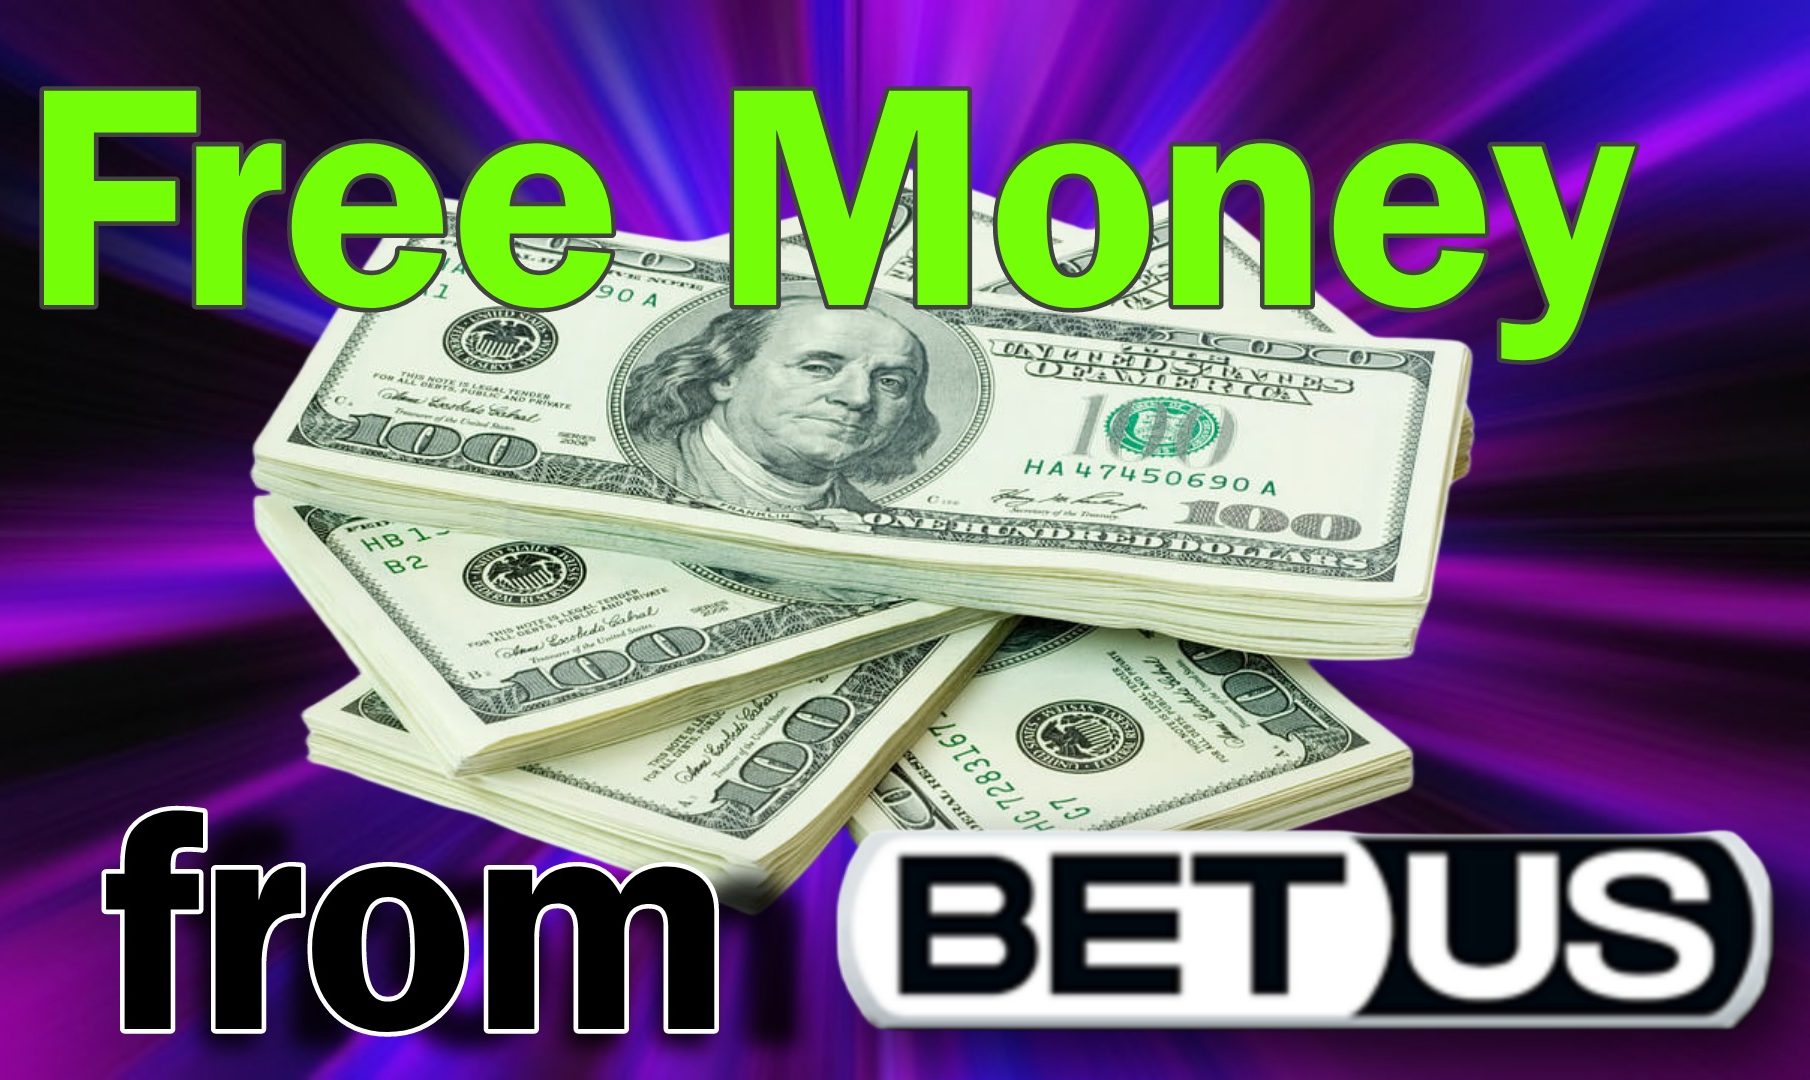 Free Money – Enter to Win Just for Logging In